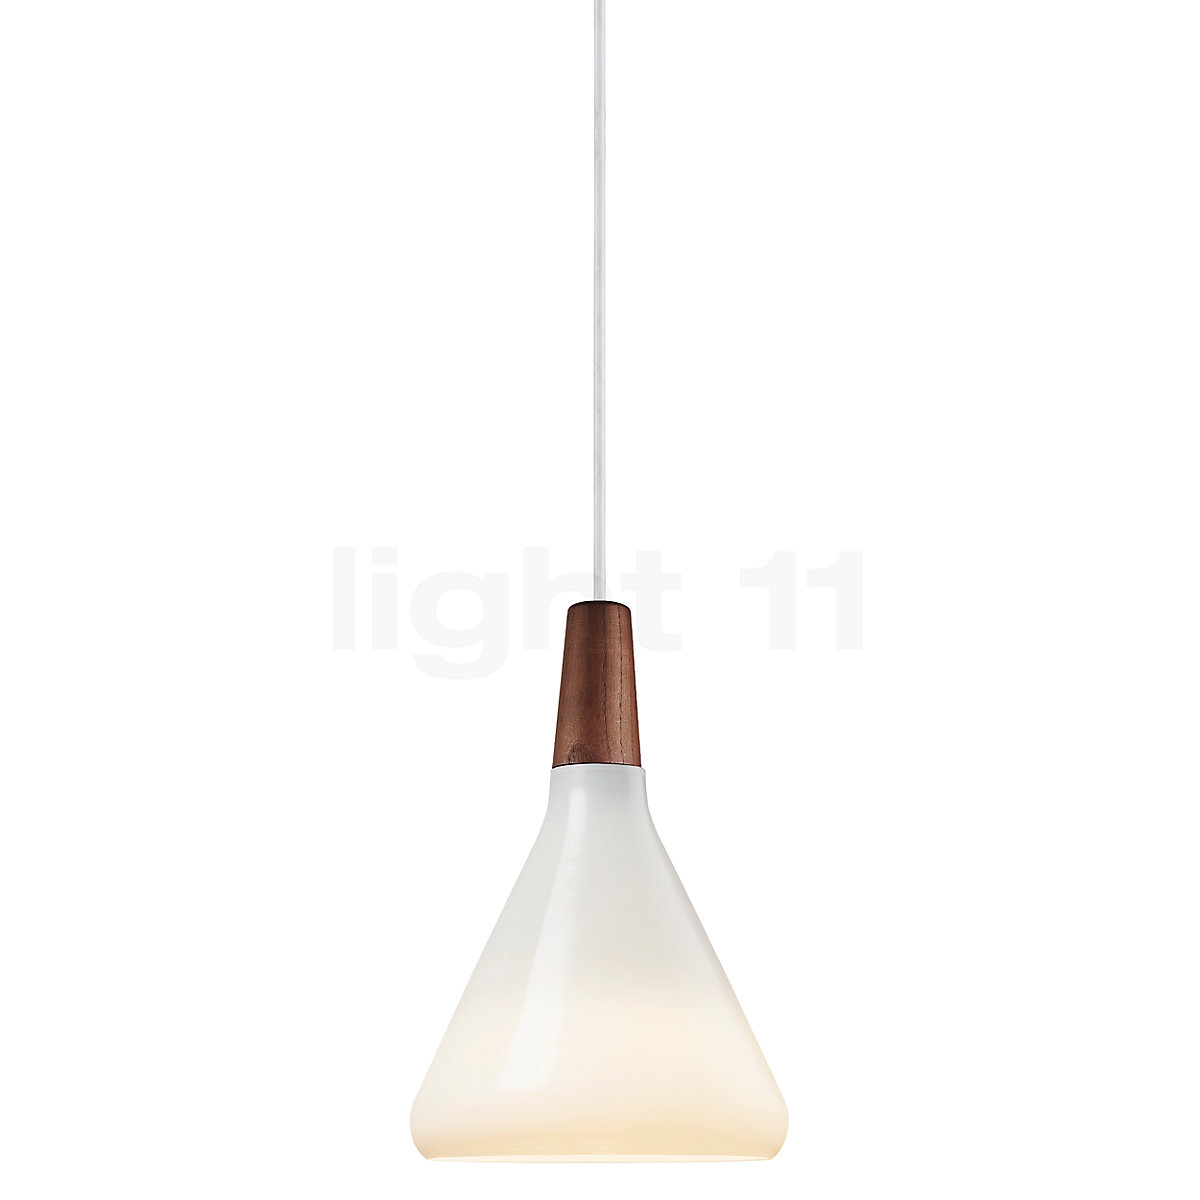 Buy Design Light the for Pendant at People Nori